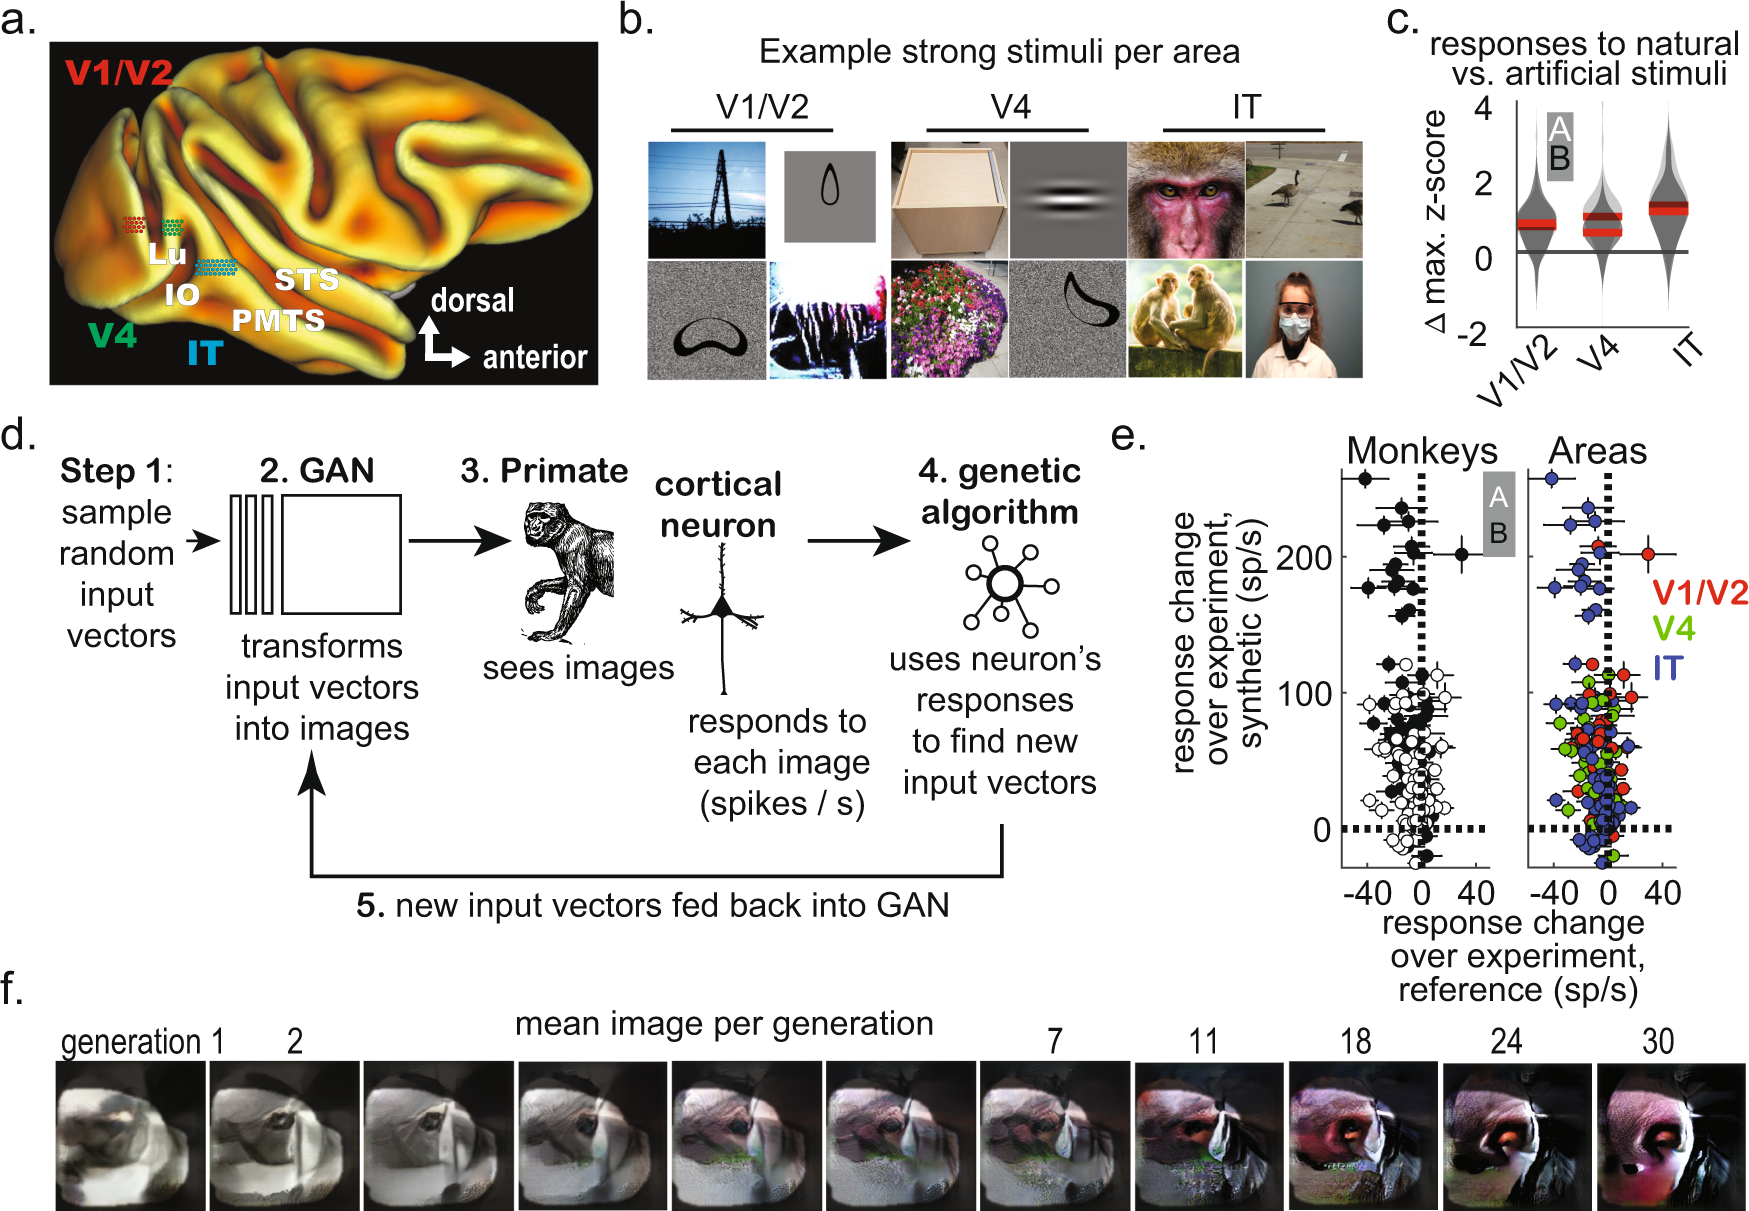 Visual prototypes in the ventral stream are attuned to complexity and gaze  behavior | Nature Communications